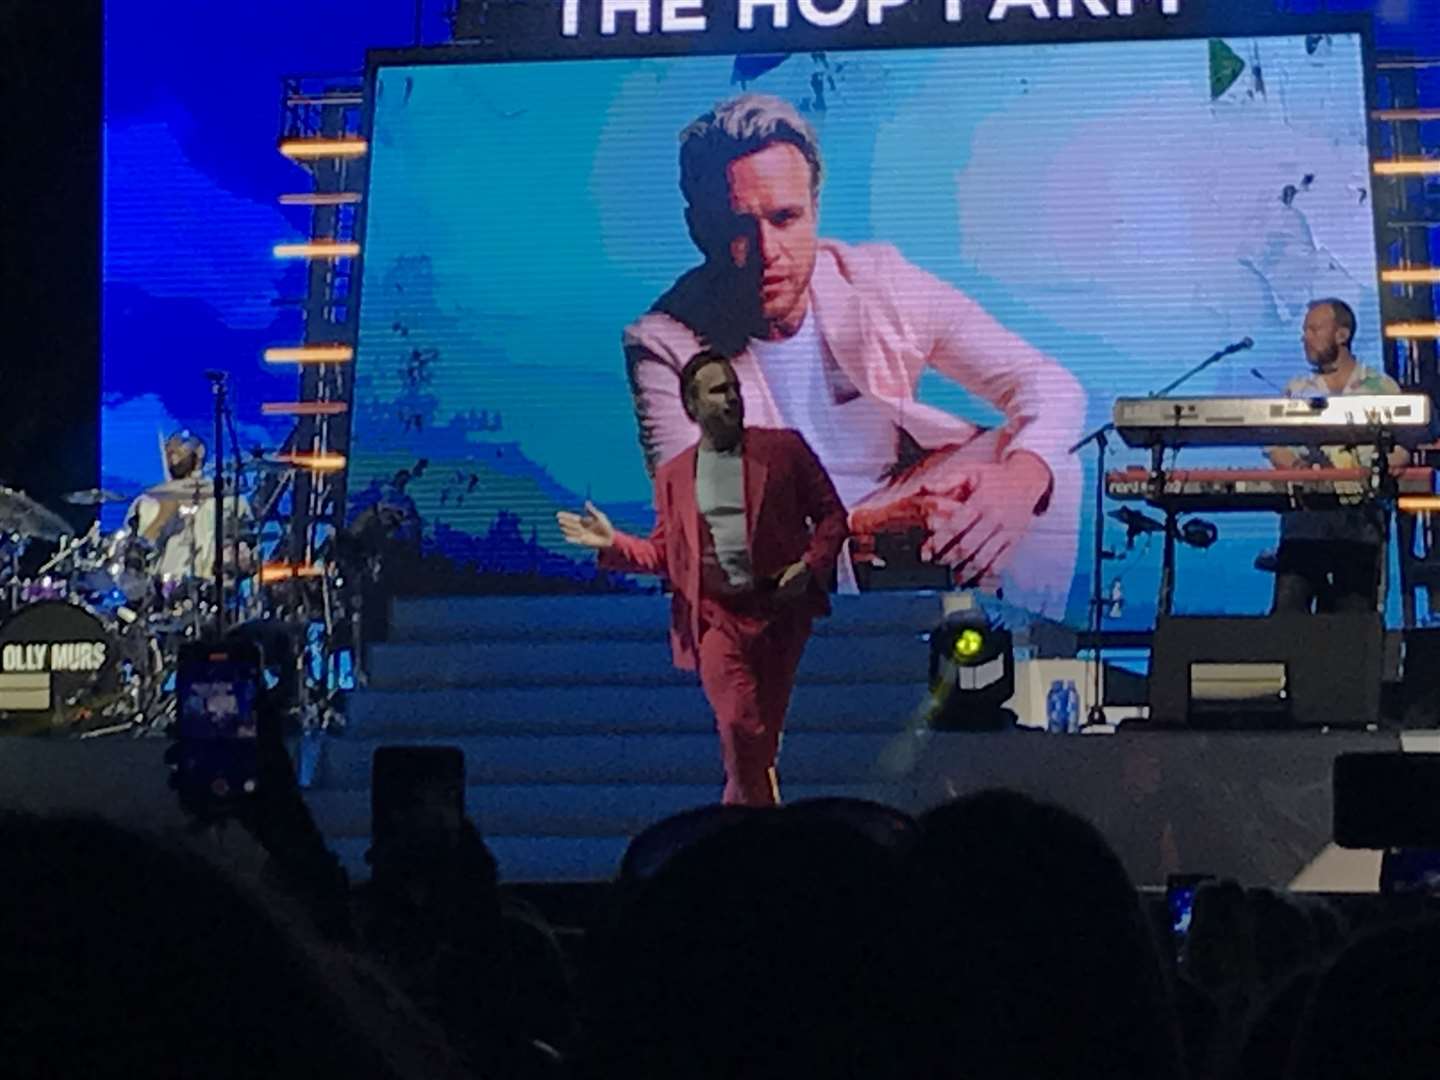 Olly Murs in his salmon suit the Hop Farm